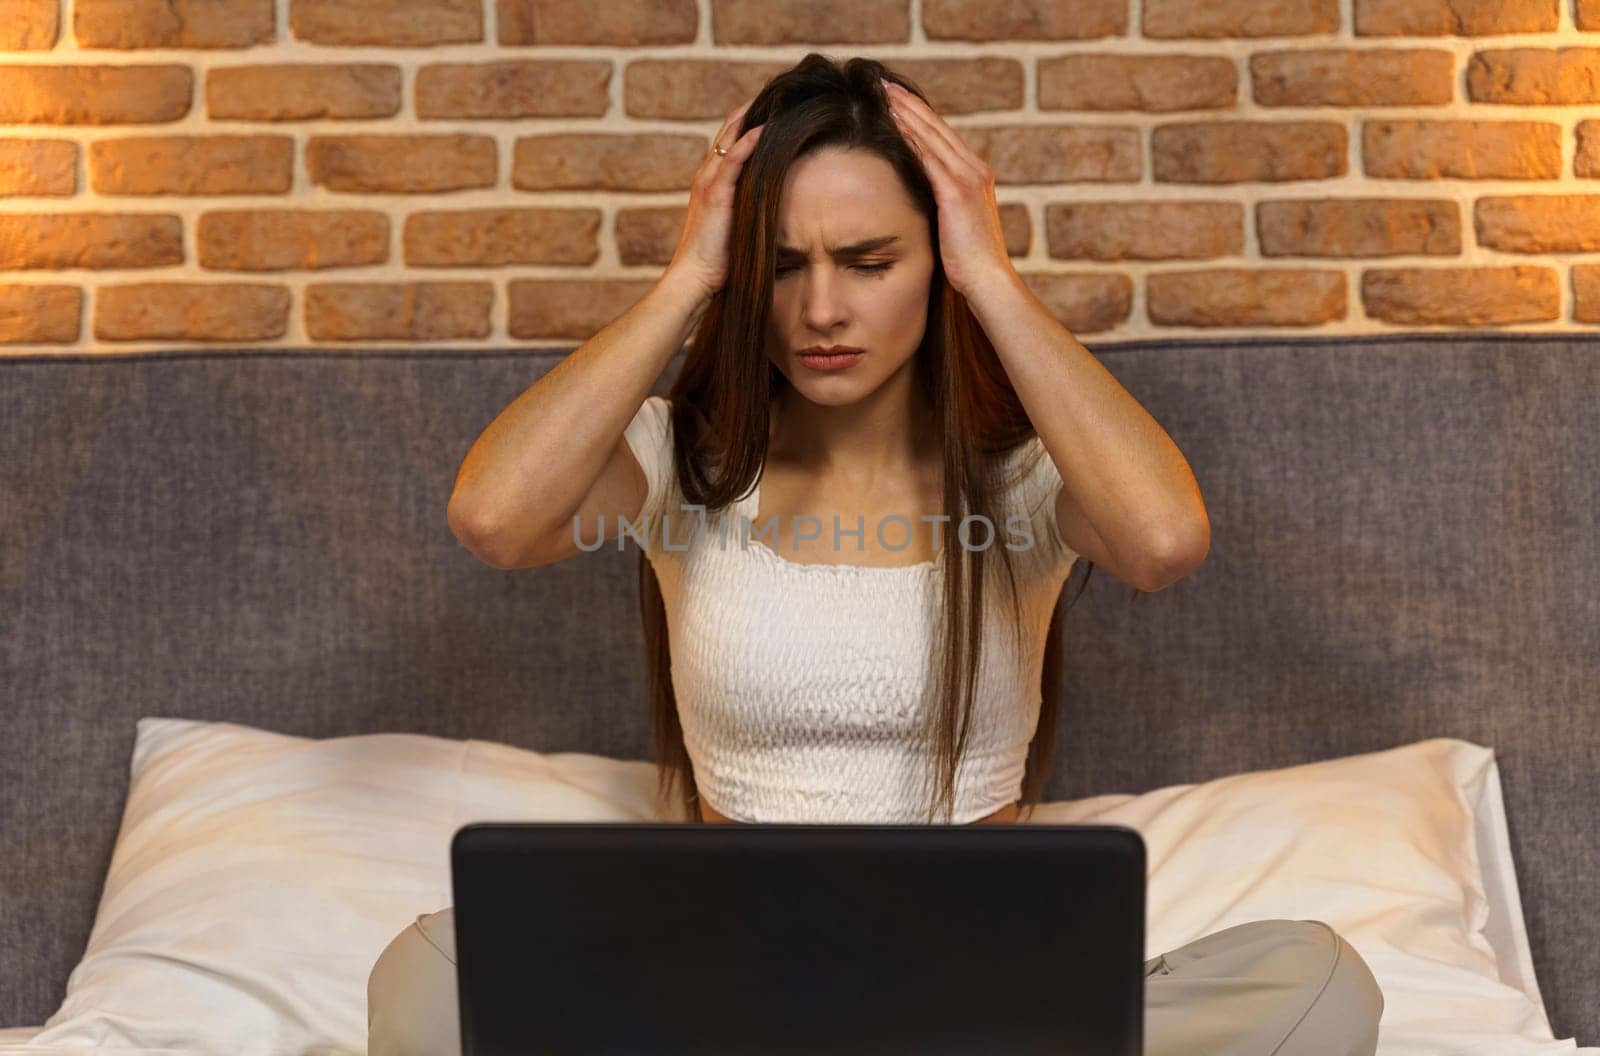 Young business woman with a headache, uses a laptop, works late at night on the bed by Sd28DimoN_1976